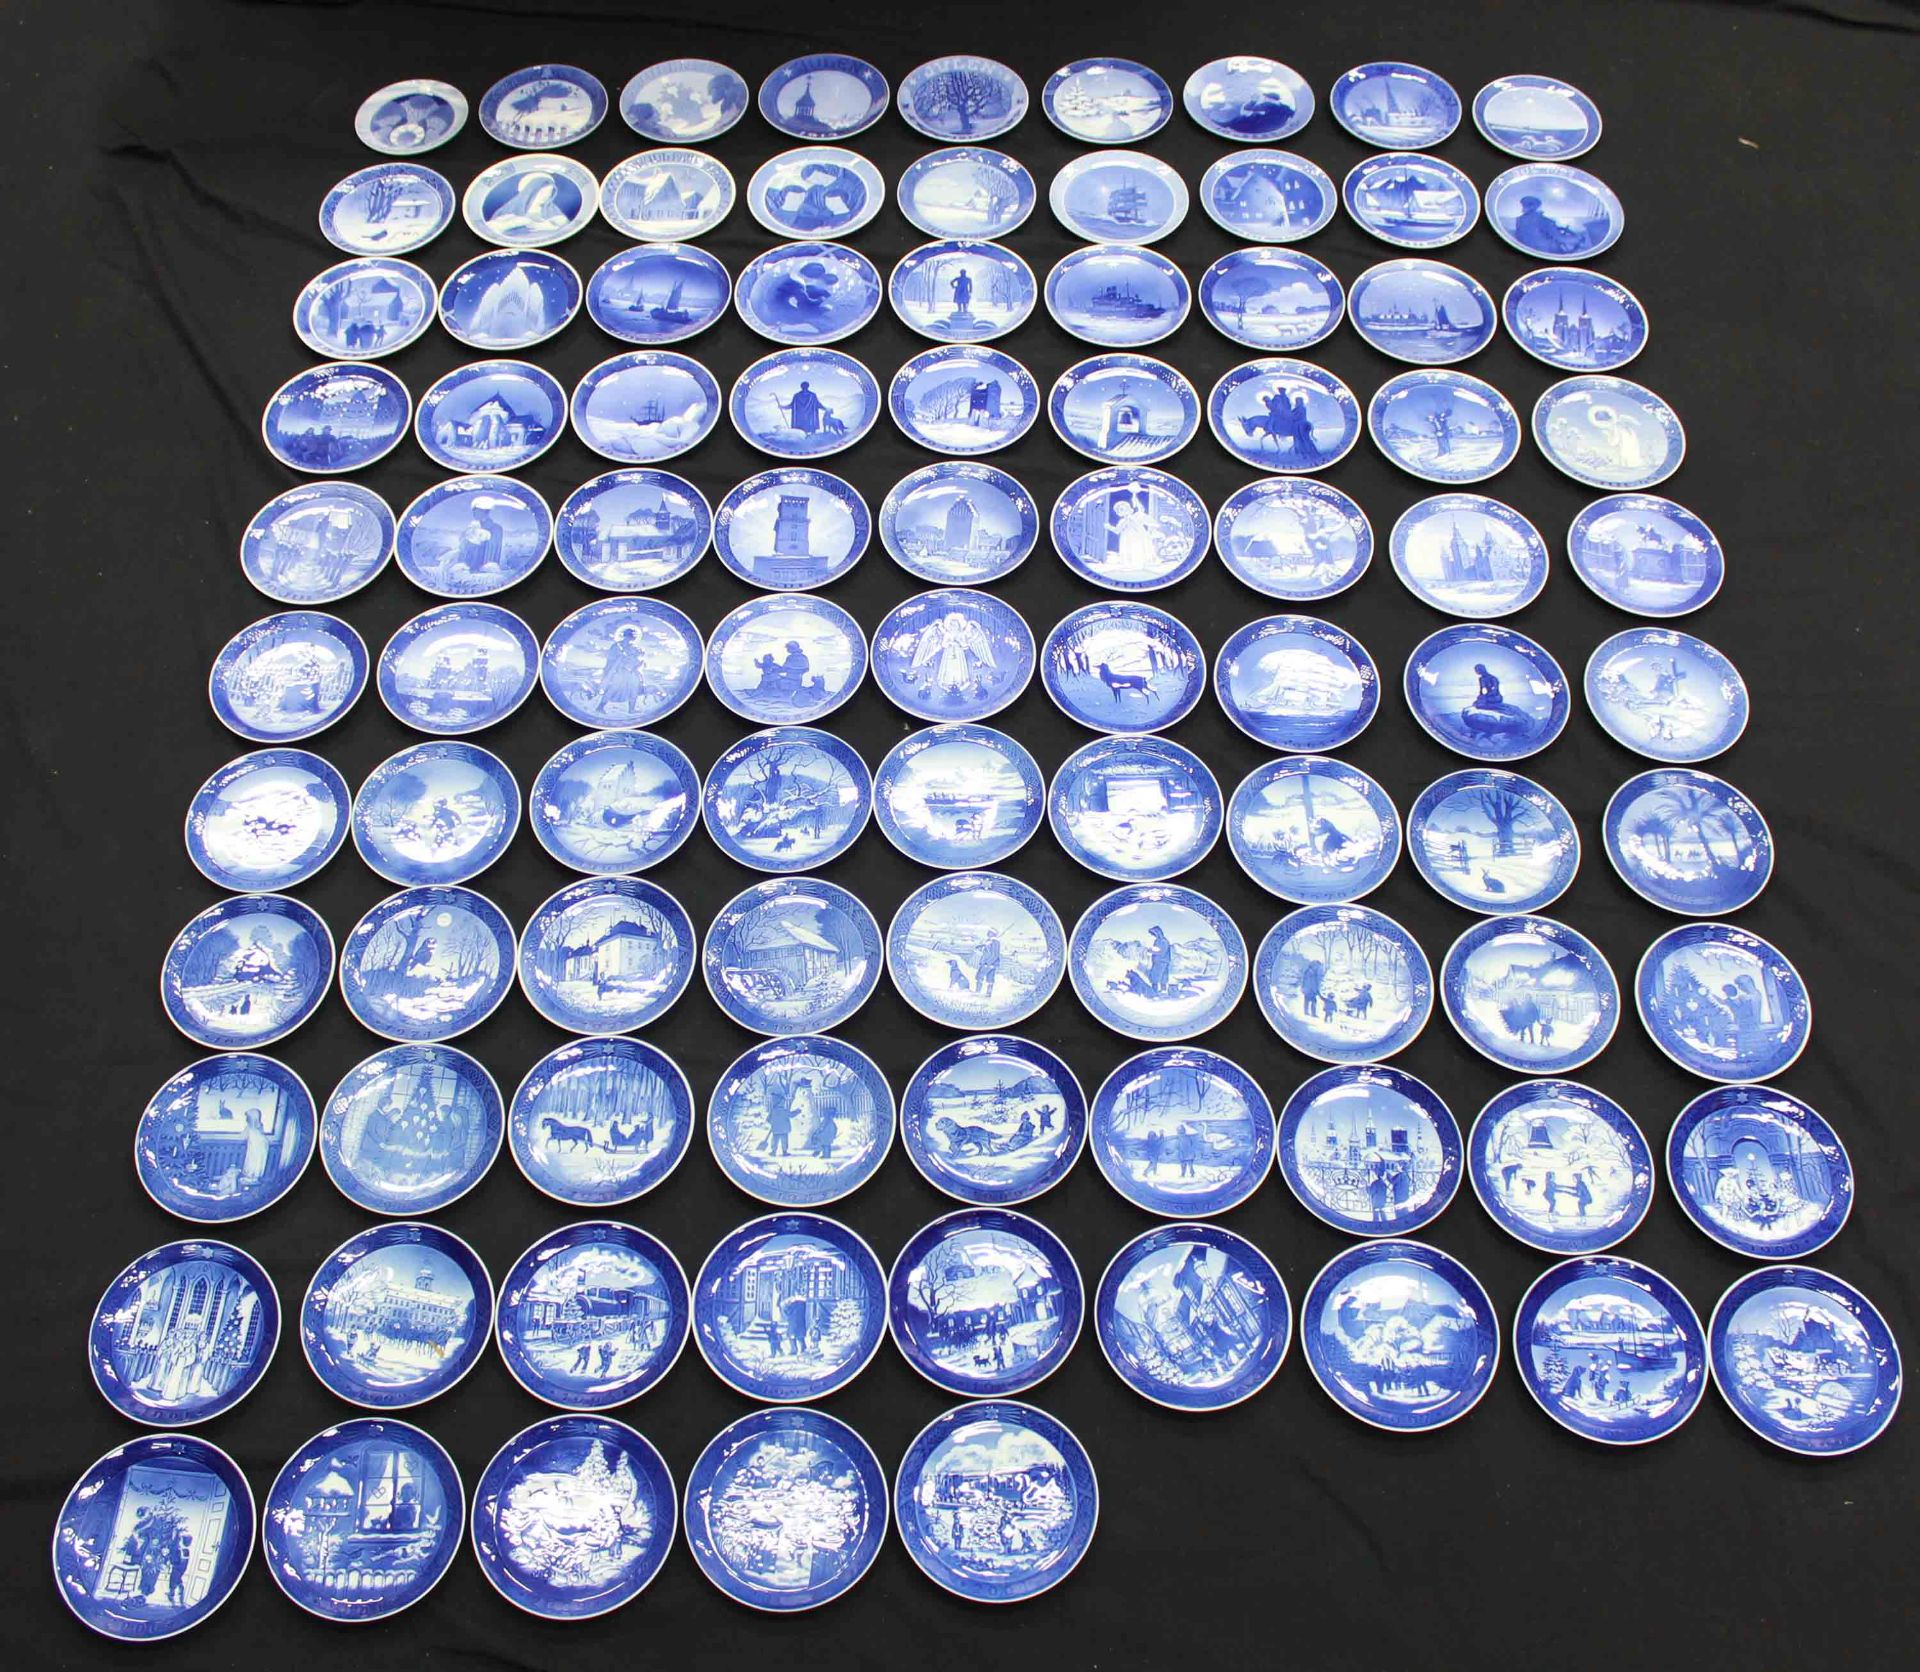 94 Christmas plates - Royal Copenhagen. Complete series from 1910-2004.